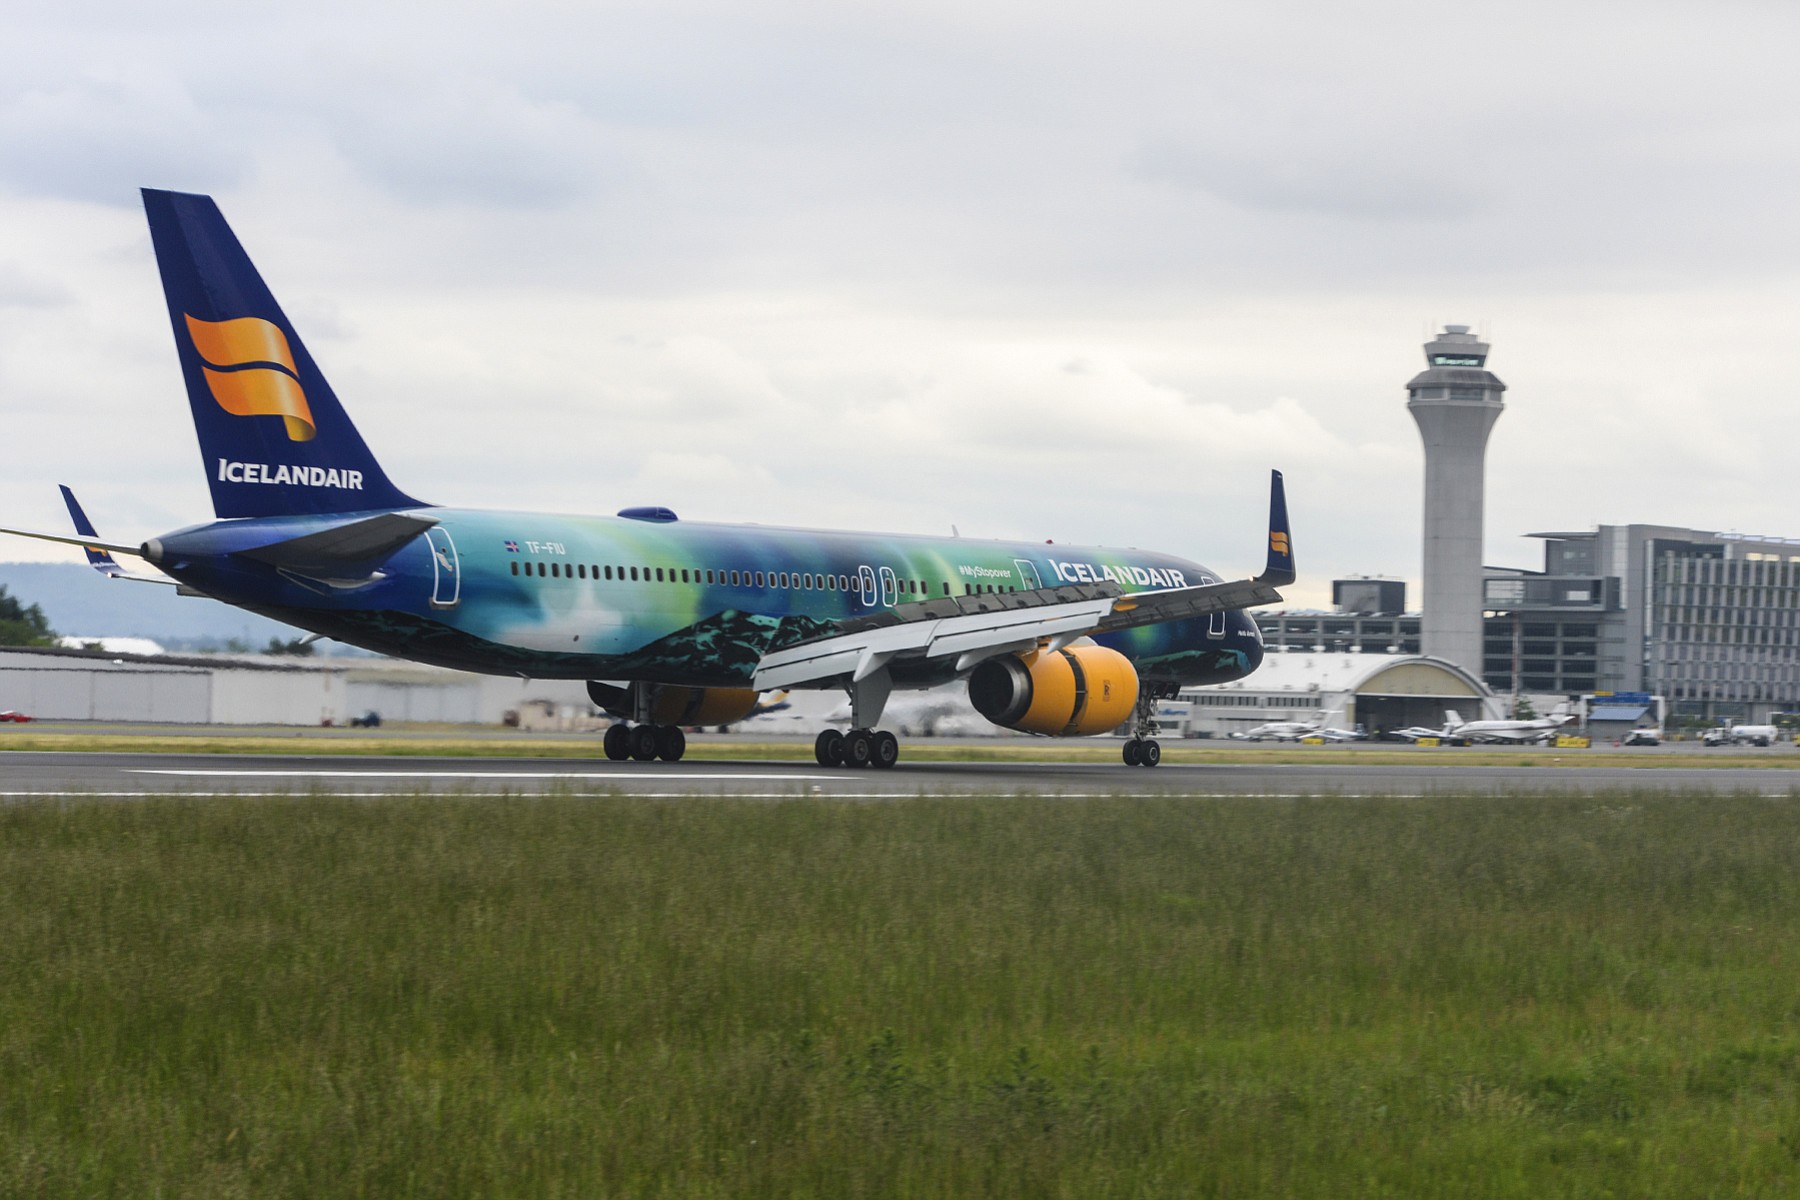 Icelandair launched seasonal nonstop service from Portland to Reykjavik, Iceland, beginning May 2.